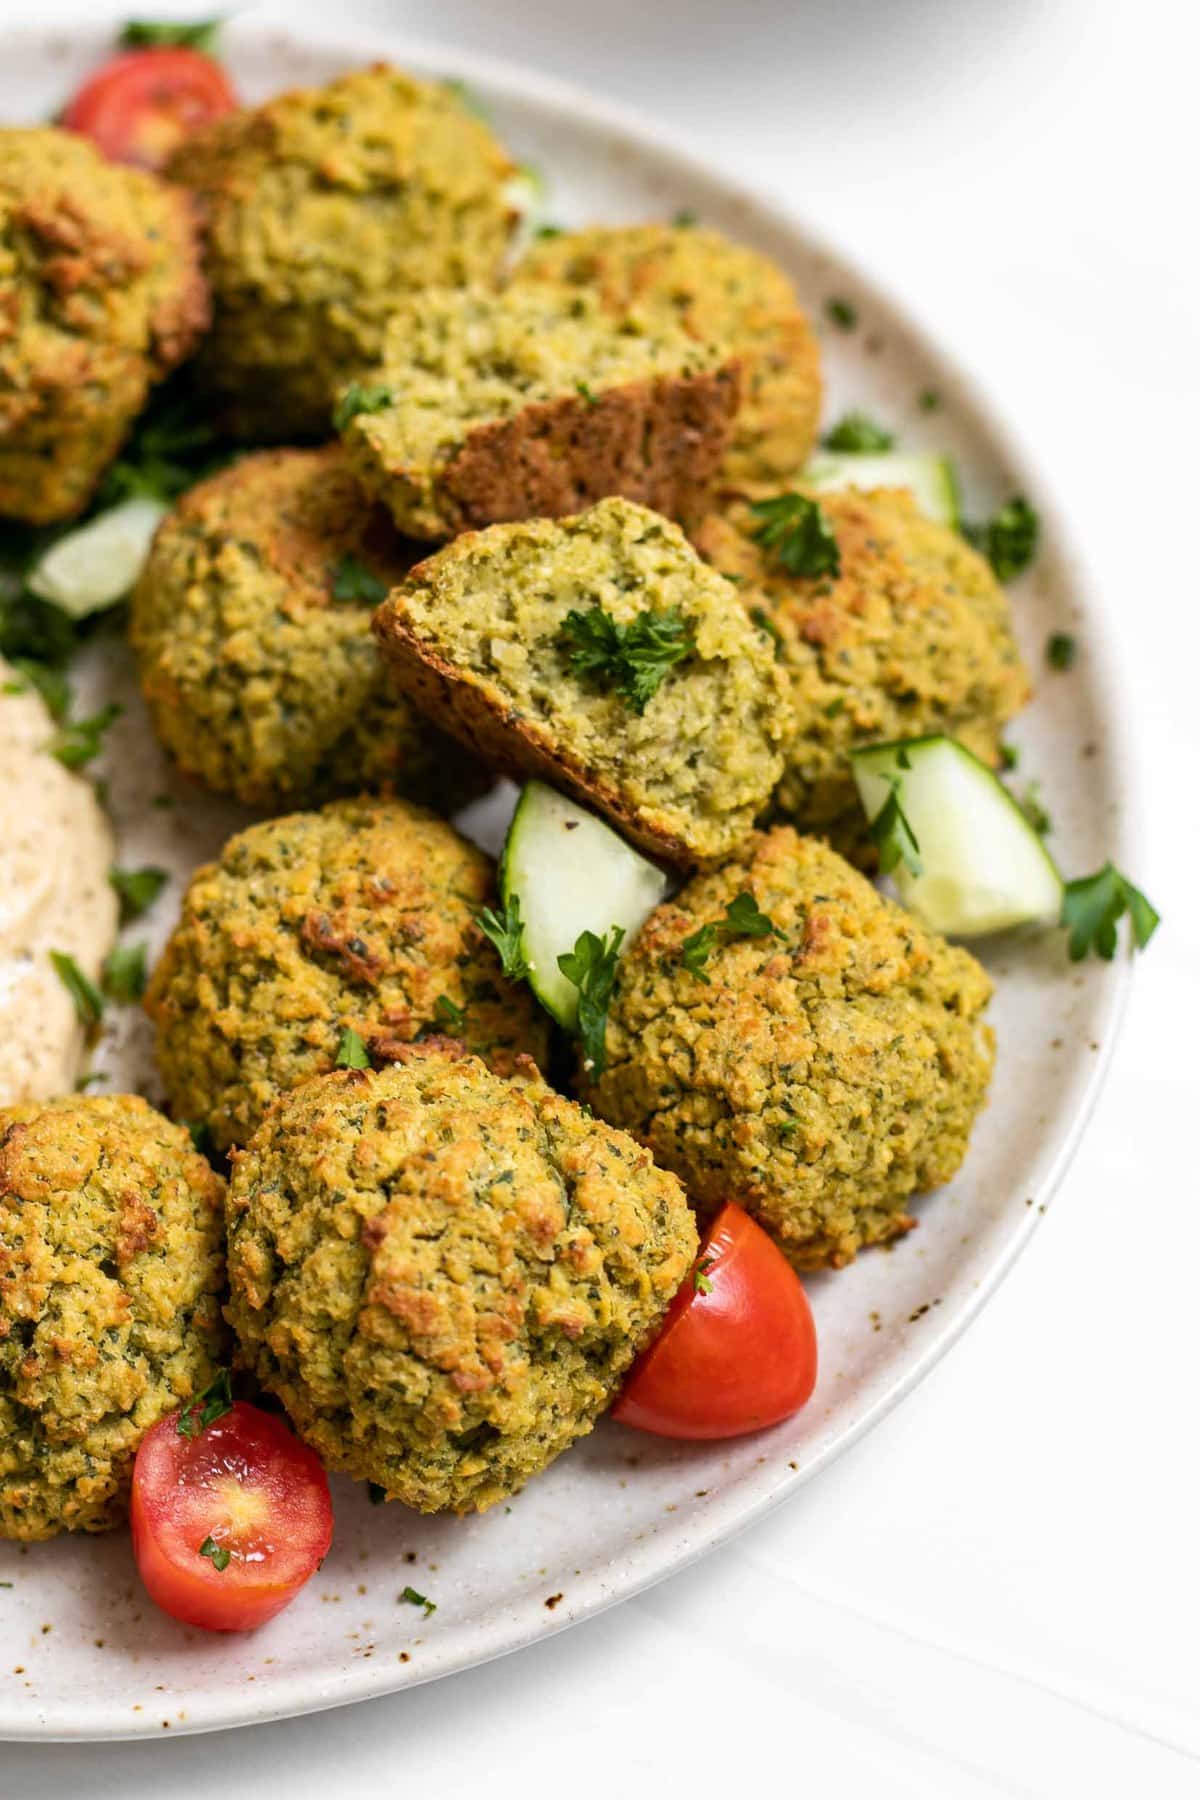 Vegan baked falafel recipe on a plate with parsley.